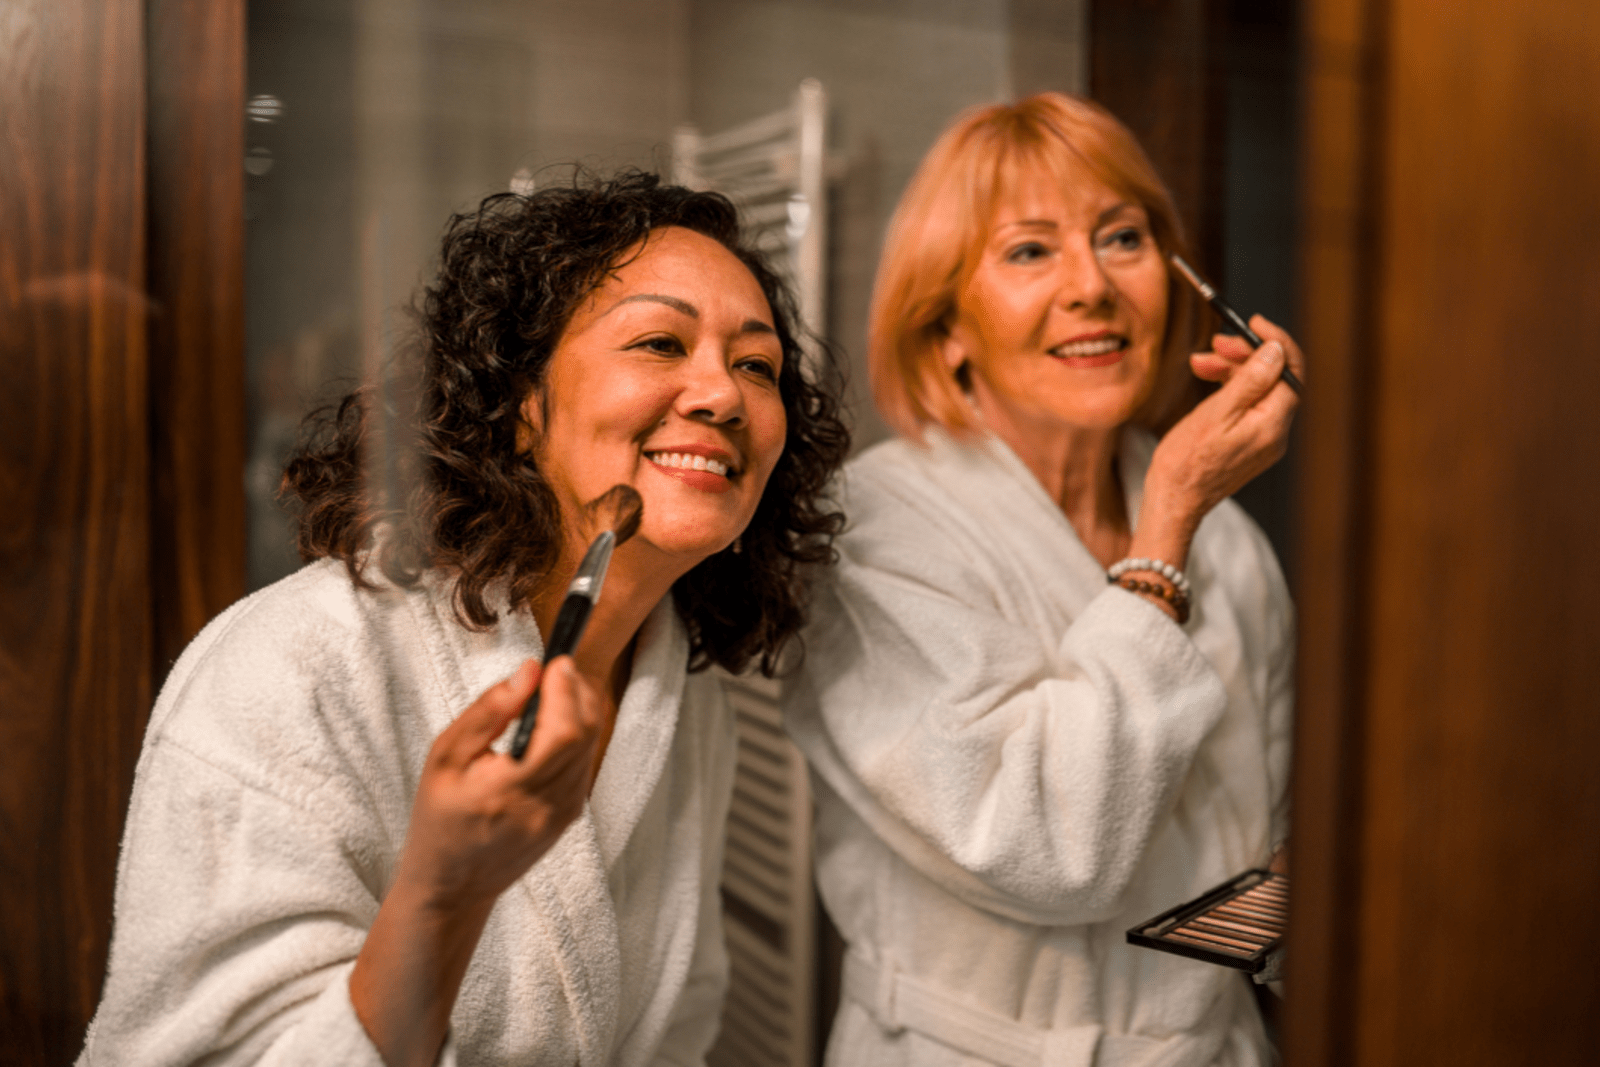 Two women putting on makeup in a cruise ship bathroom